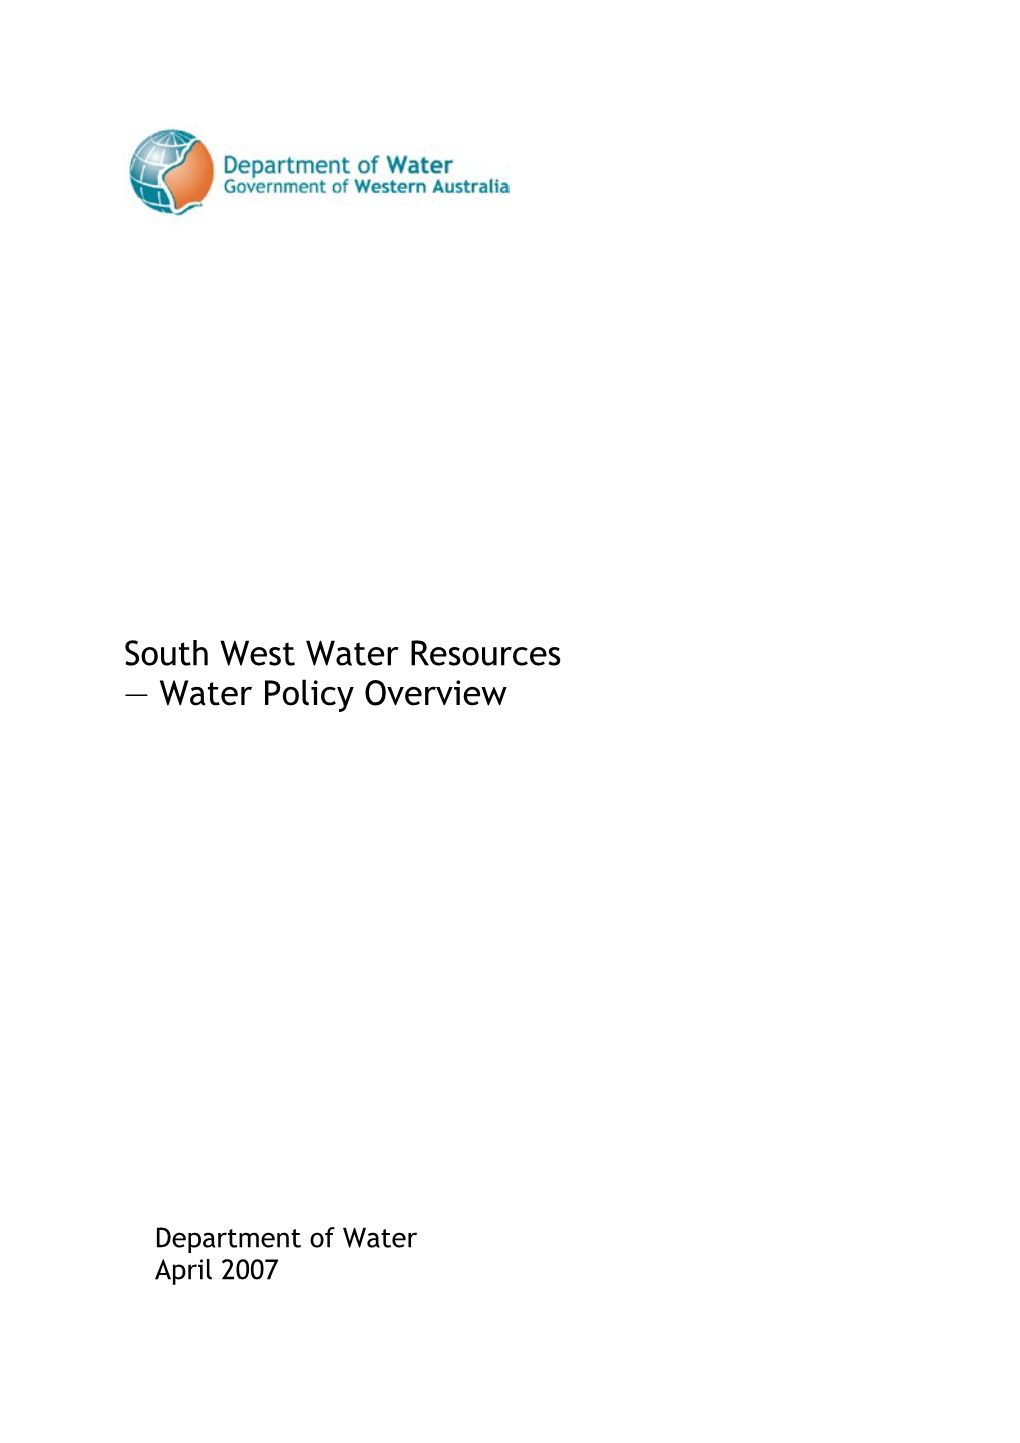 South West Water Resources — Water Policy Overview